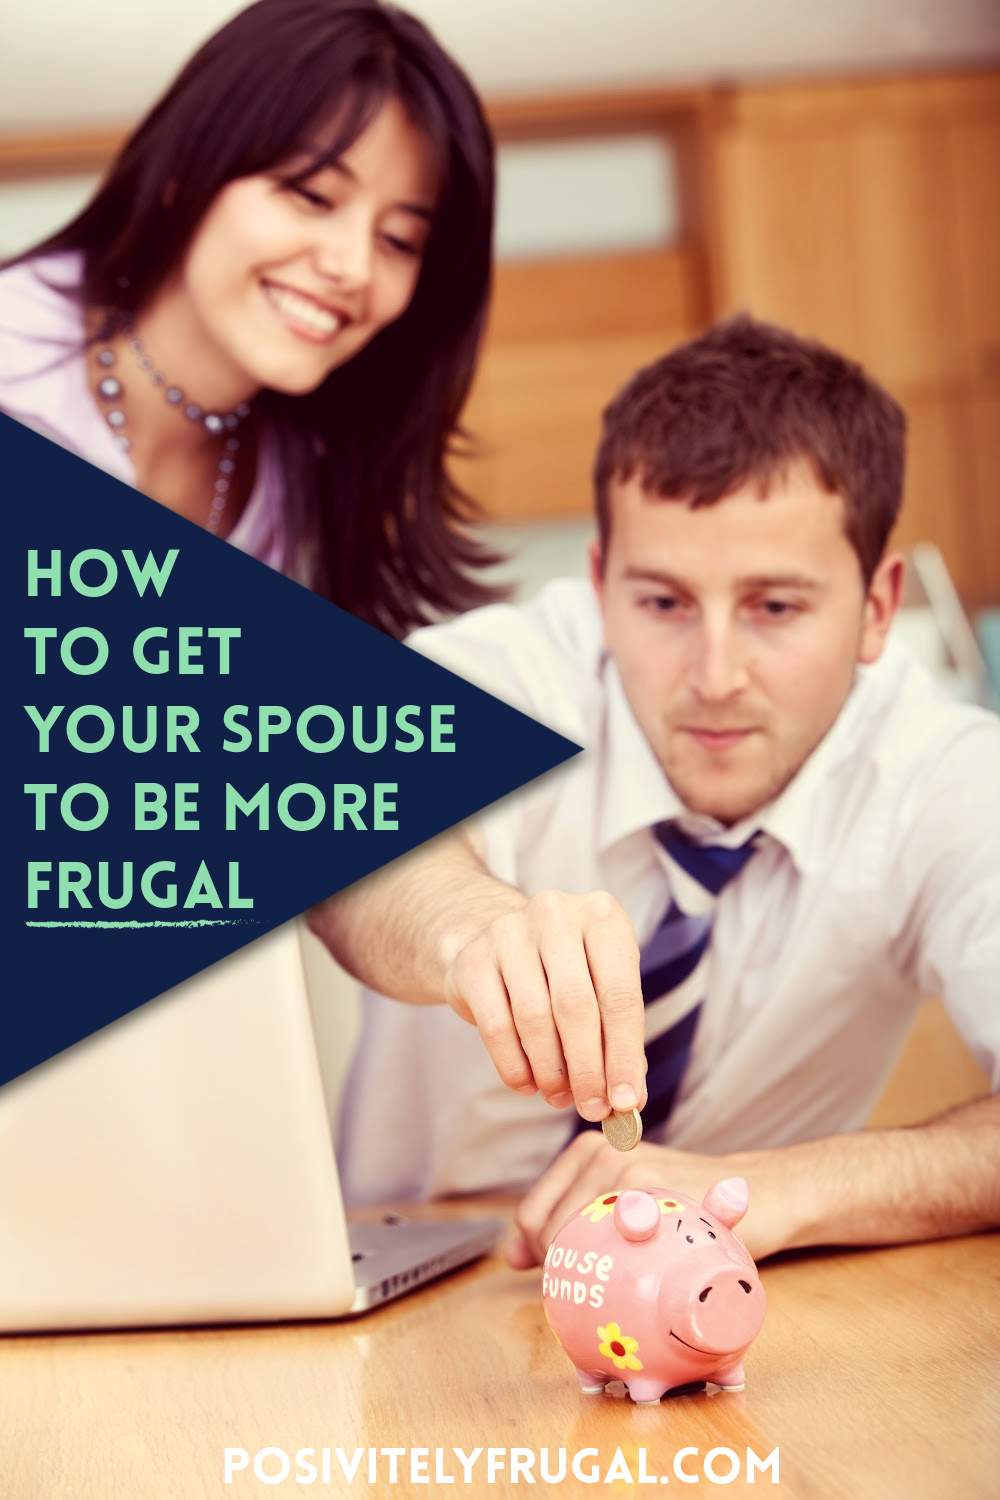 How Do You Get Your Spouse To Be More Frugal by PositivelyFrugal.com